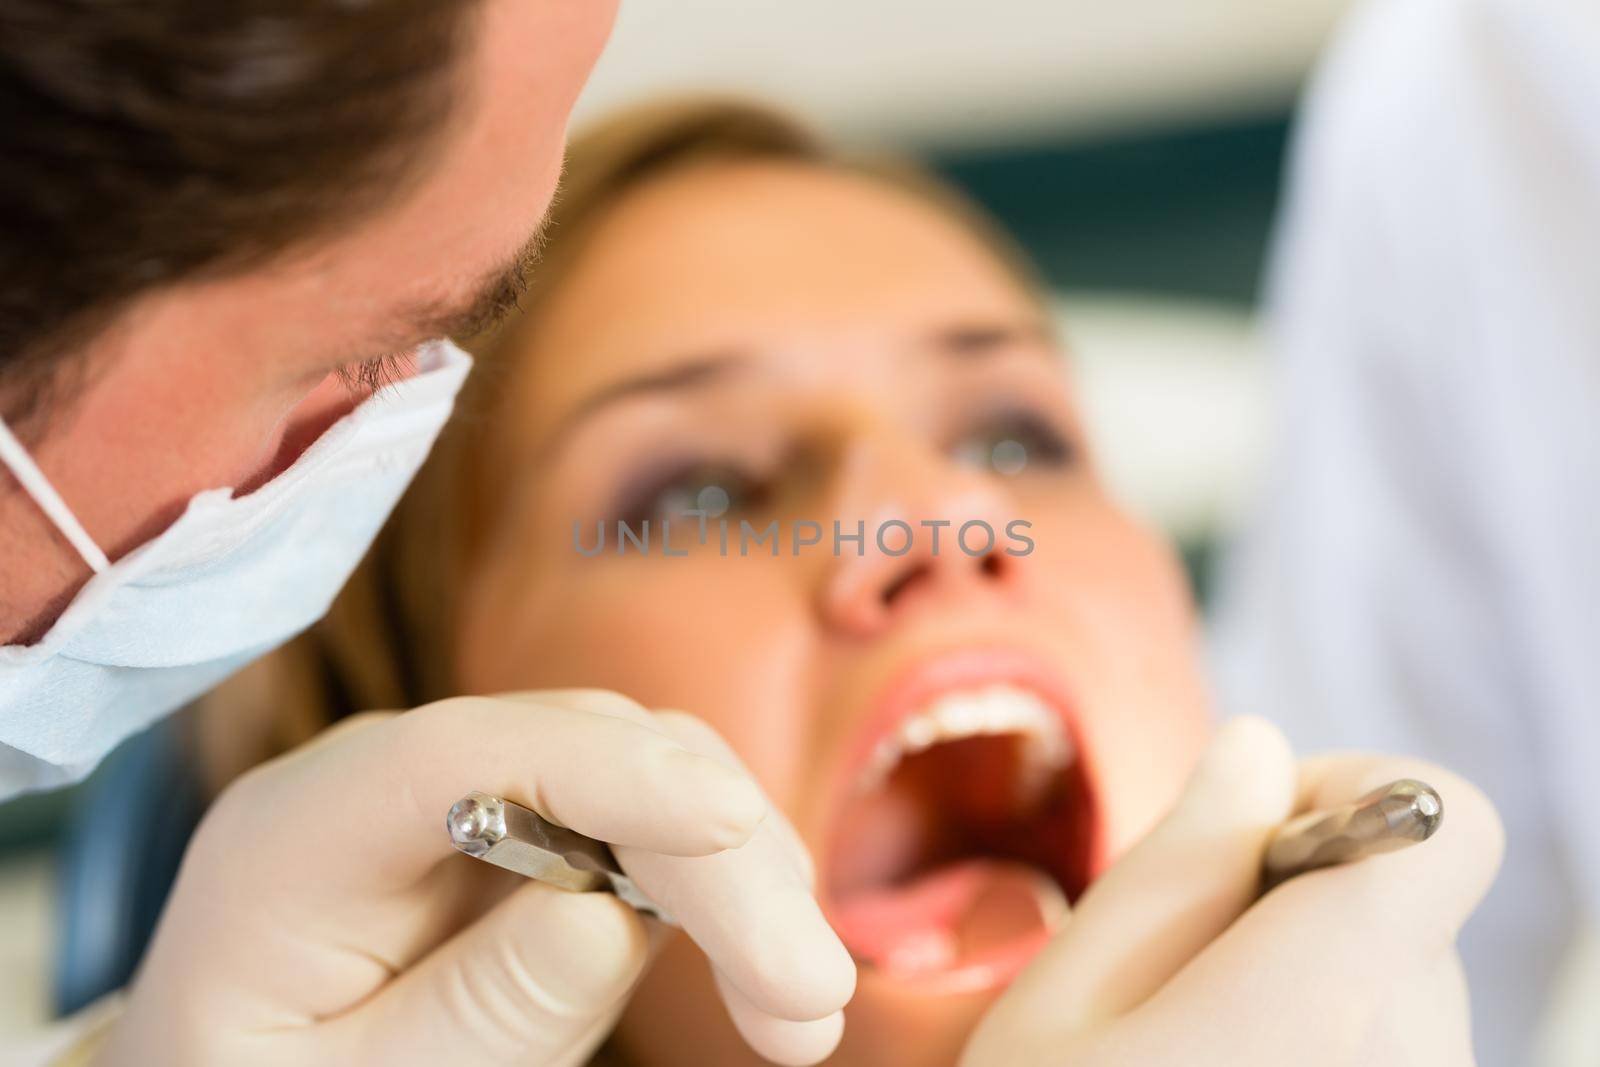 Female patient with dentist in a dental treatment, wearing masks and gloves